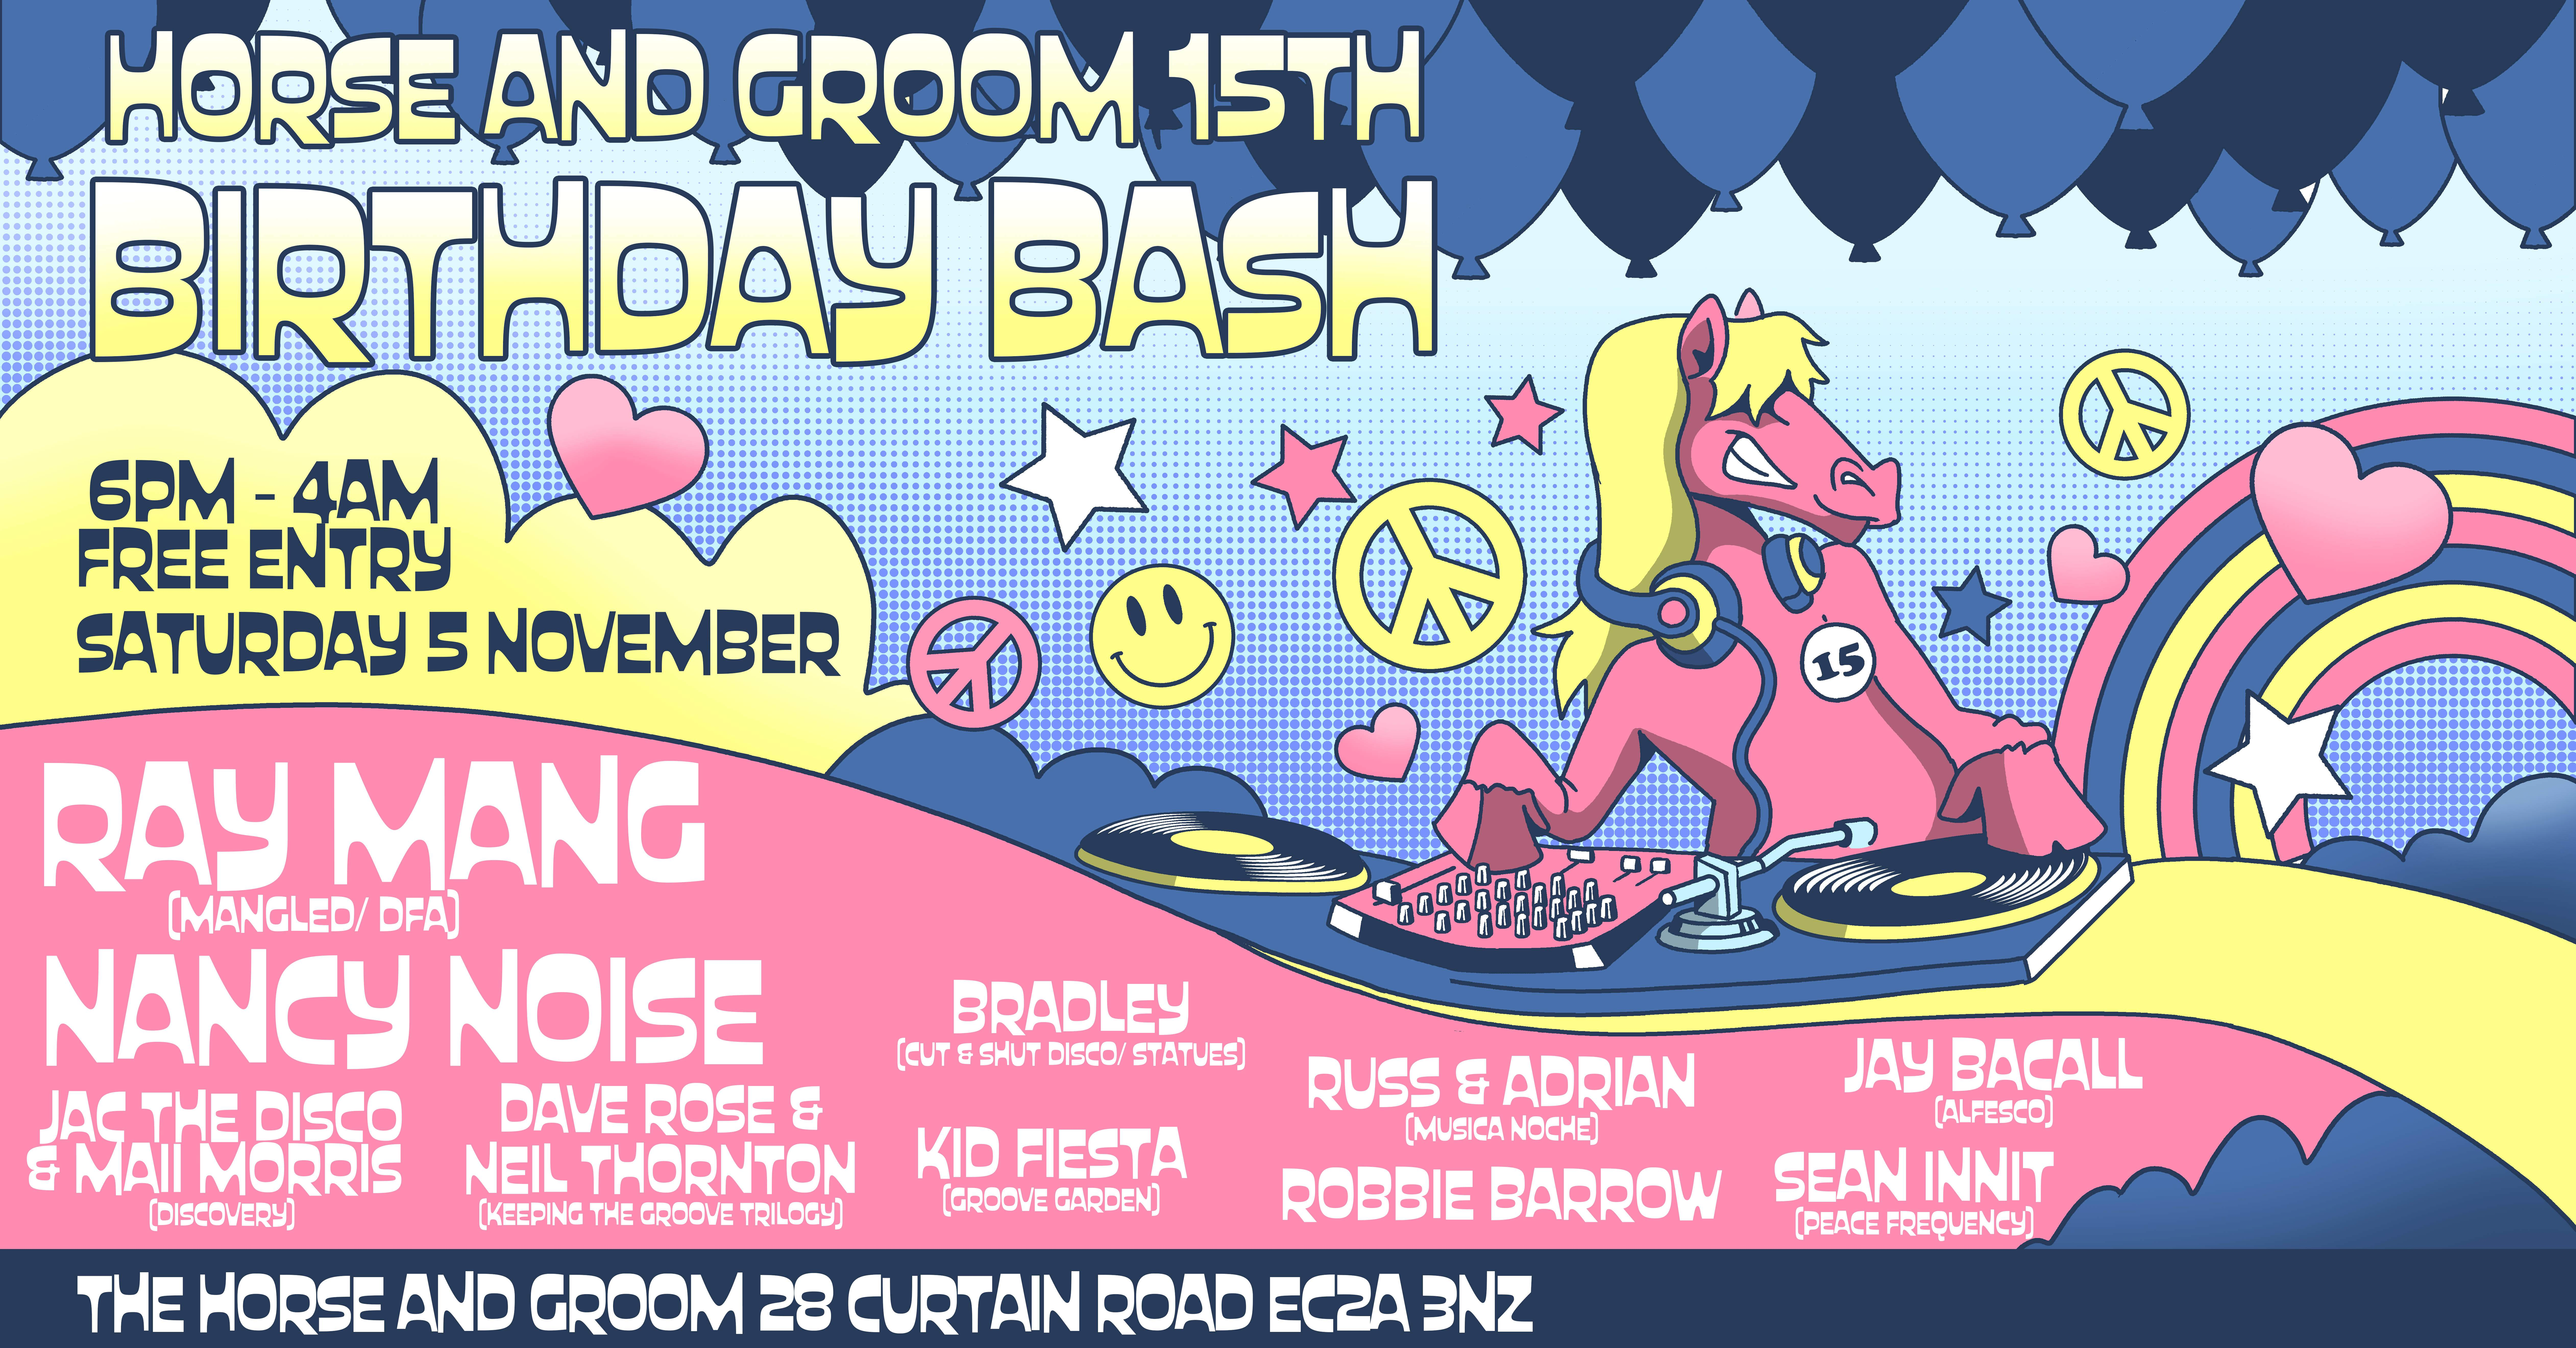 Horse and Groom's 15th free birthday bash w/ Ray Mang & Nancy Noise  - フライヤー表